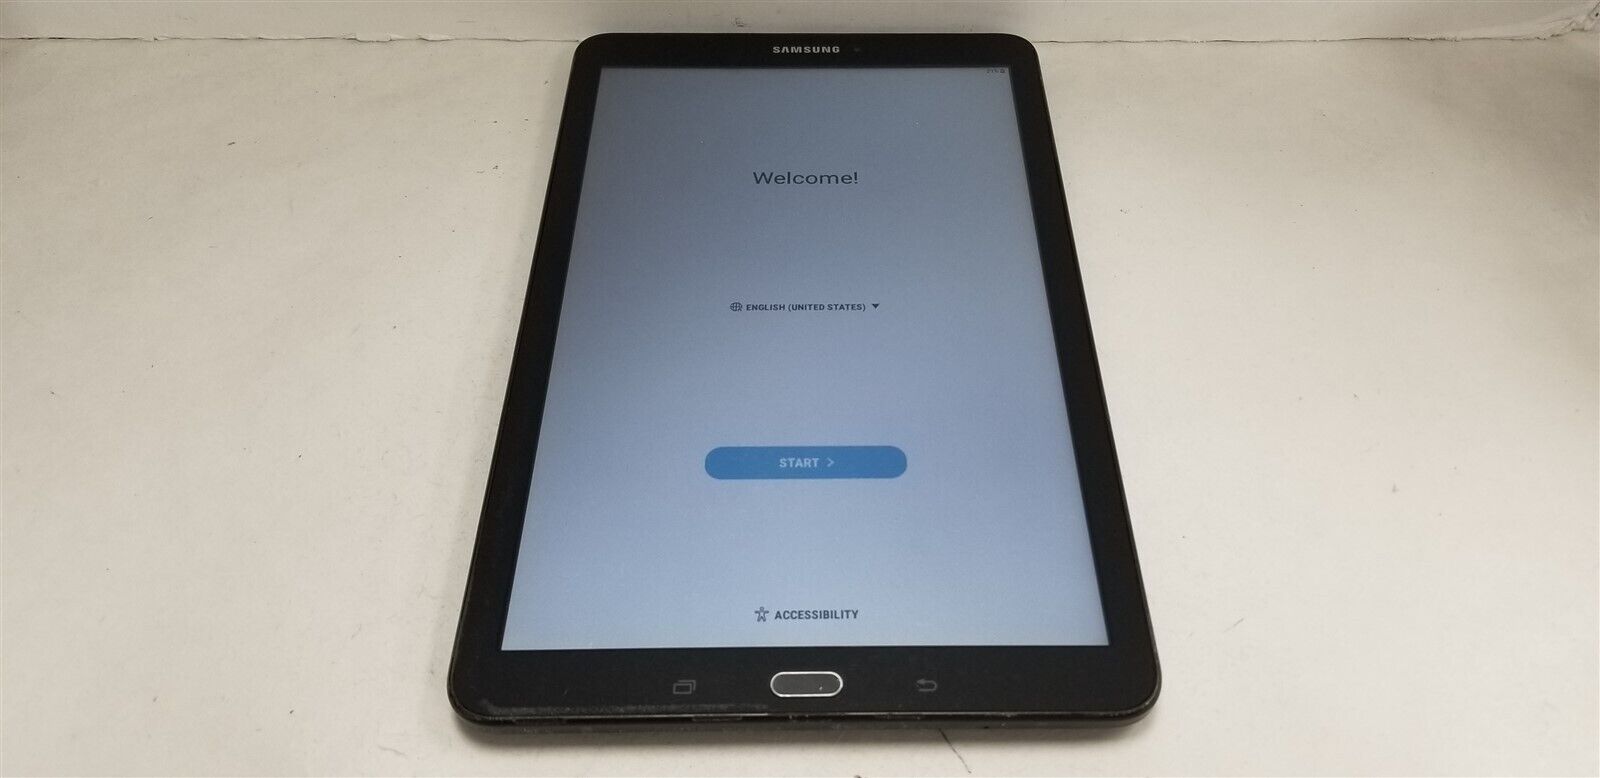 Samsung Galaxy Tab E 16gb SM-T560NU (WIFI Only) Android Smart Tablet NF8379